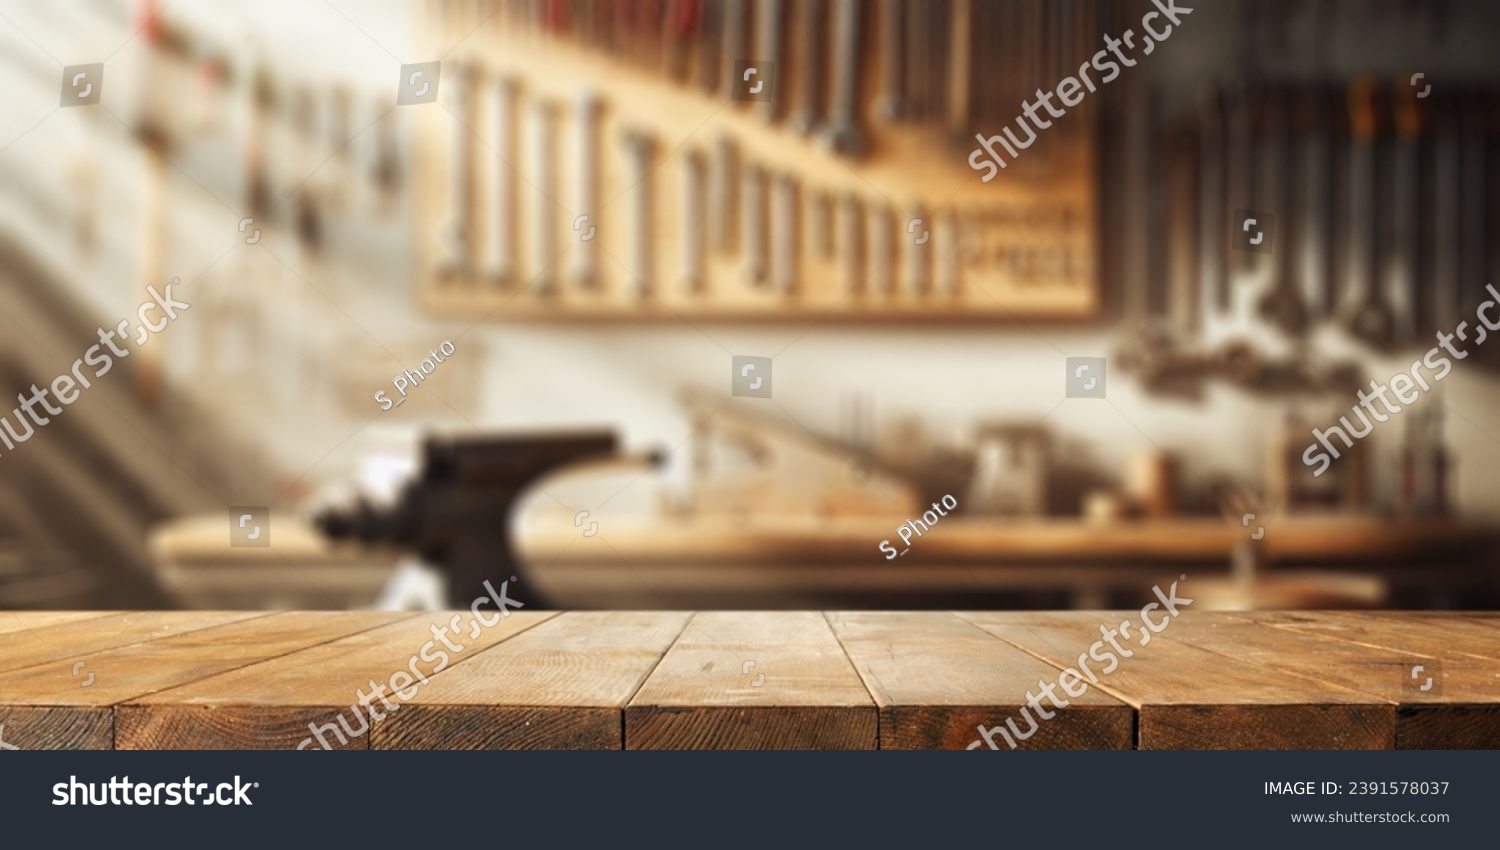 Worn old wooden table and workshop interior. Retro vintage photo of background and mockup. Sun light and dark shadows.  #2391578037